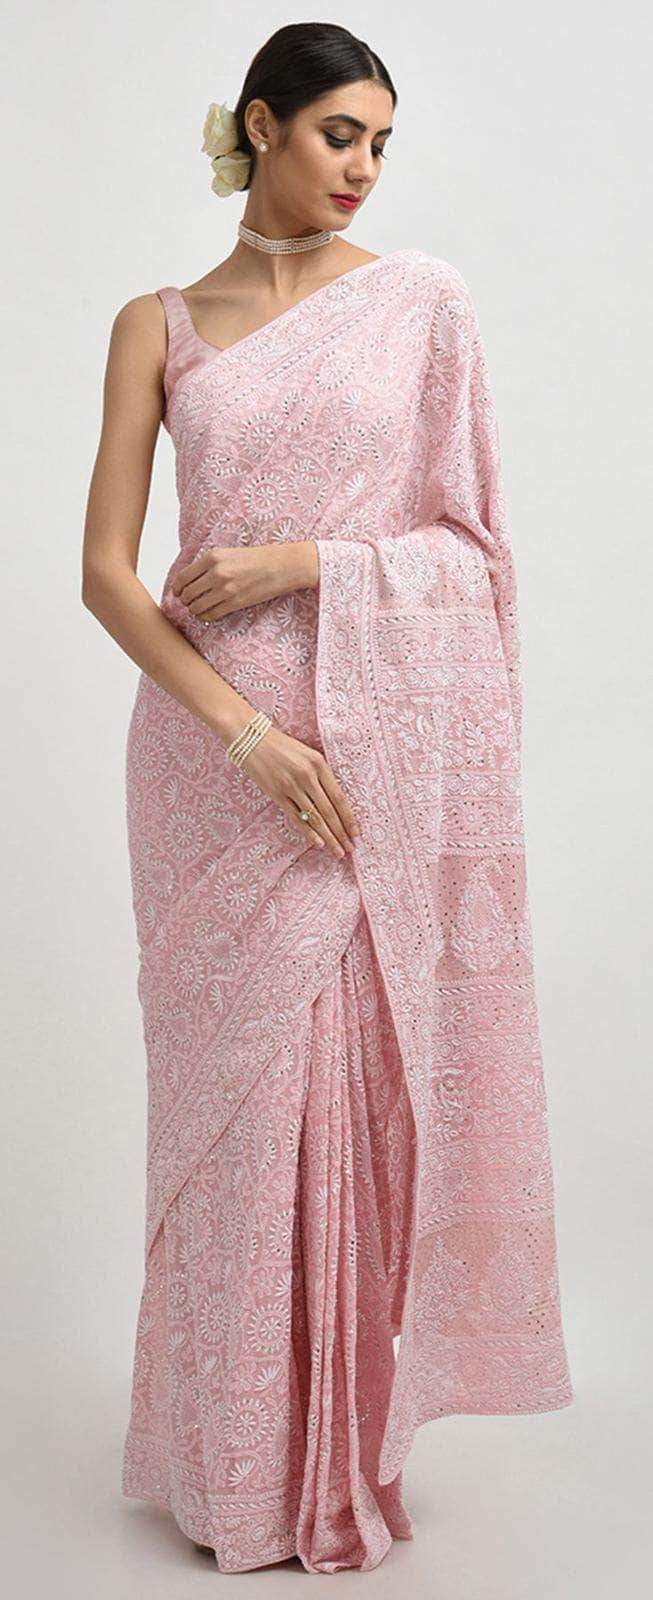 PATINE - Chikankari Sari embellished with a Parsi Gara border, paired with  a bustier blouse. . . In order to create this beautifull sari which is a  combination of Chikankari and Parsi